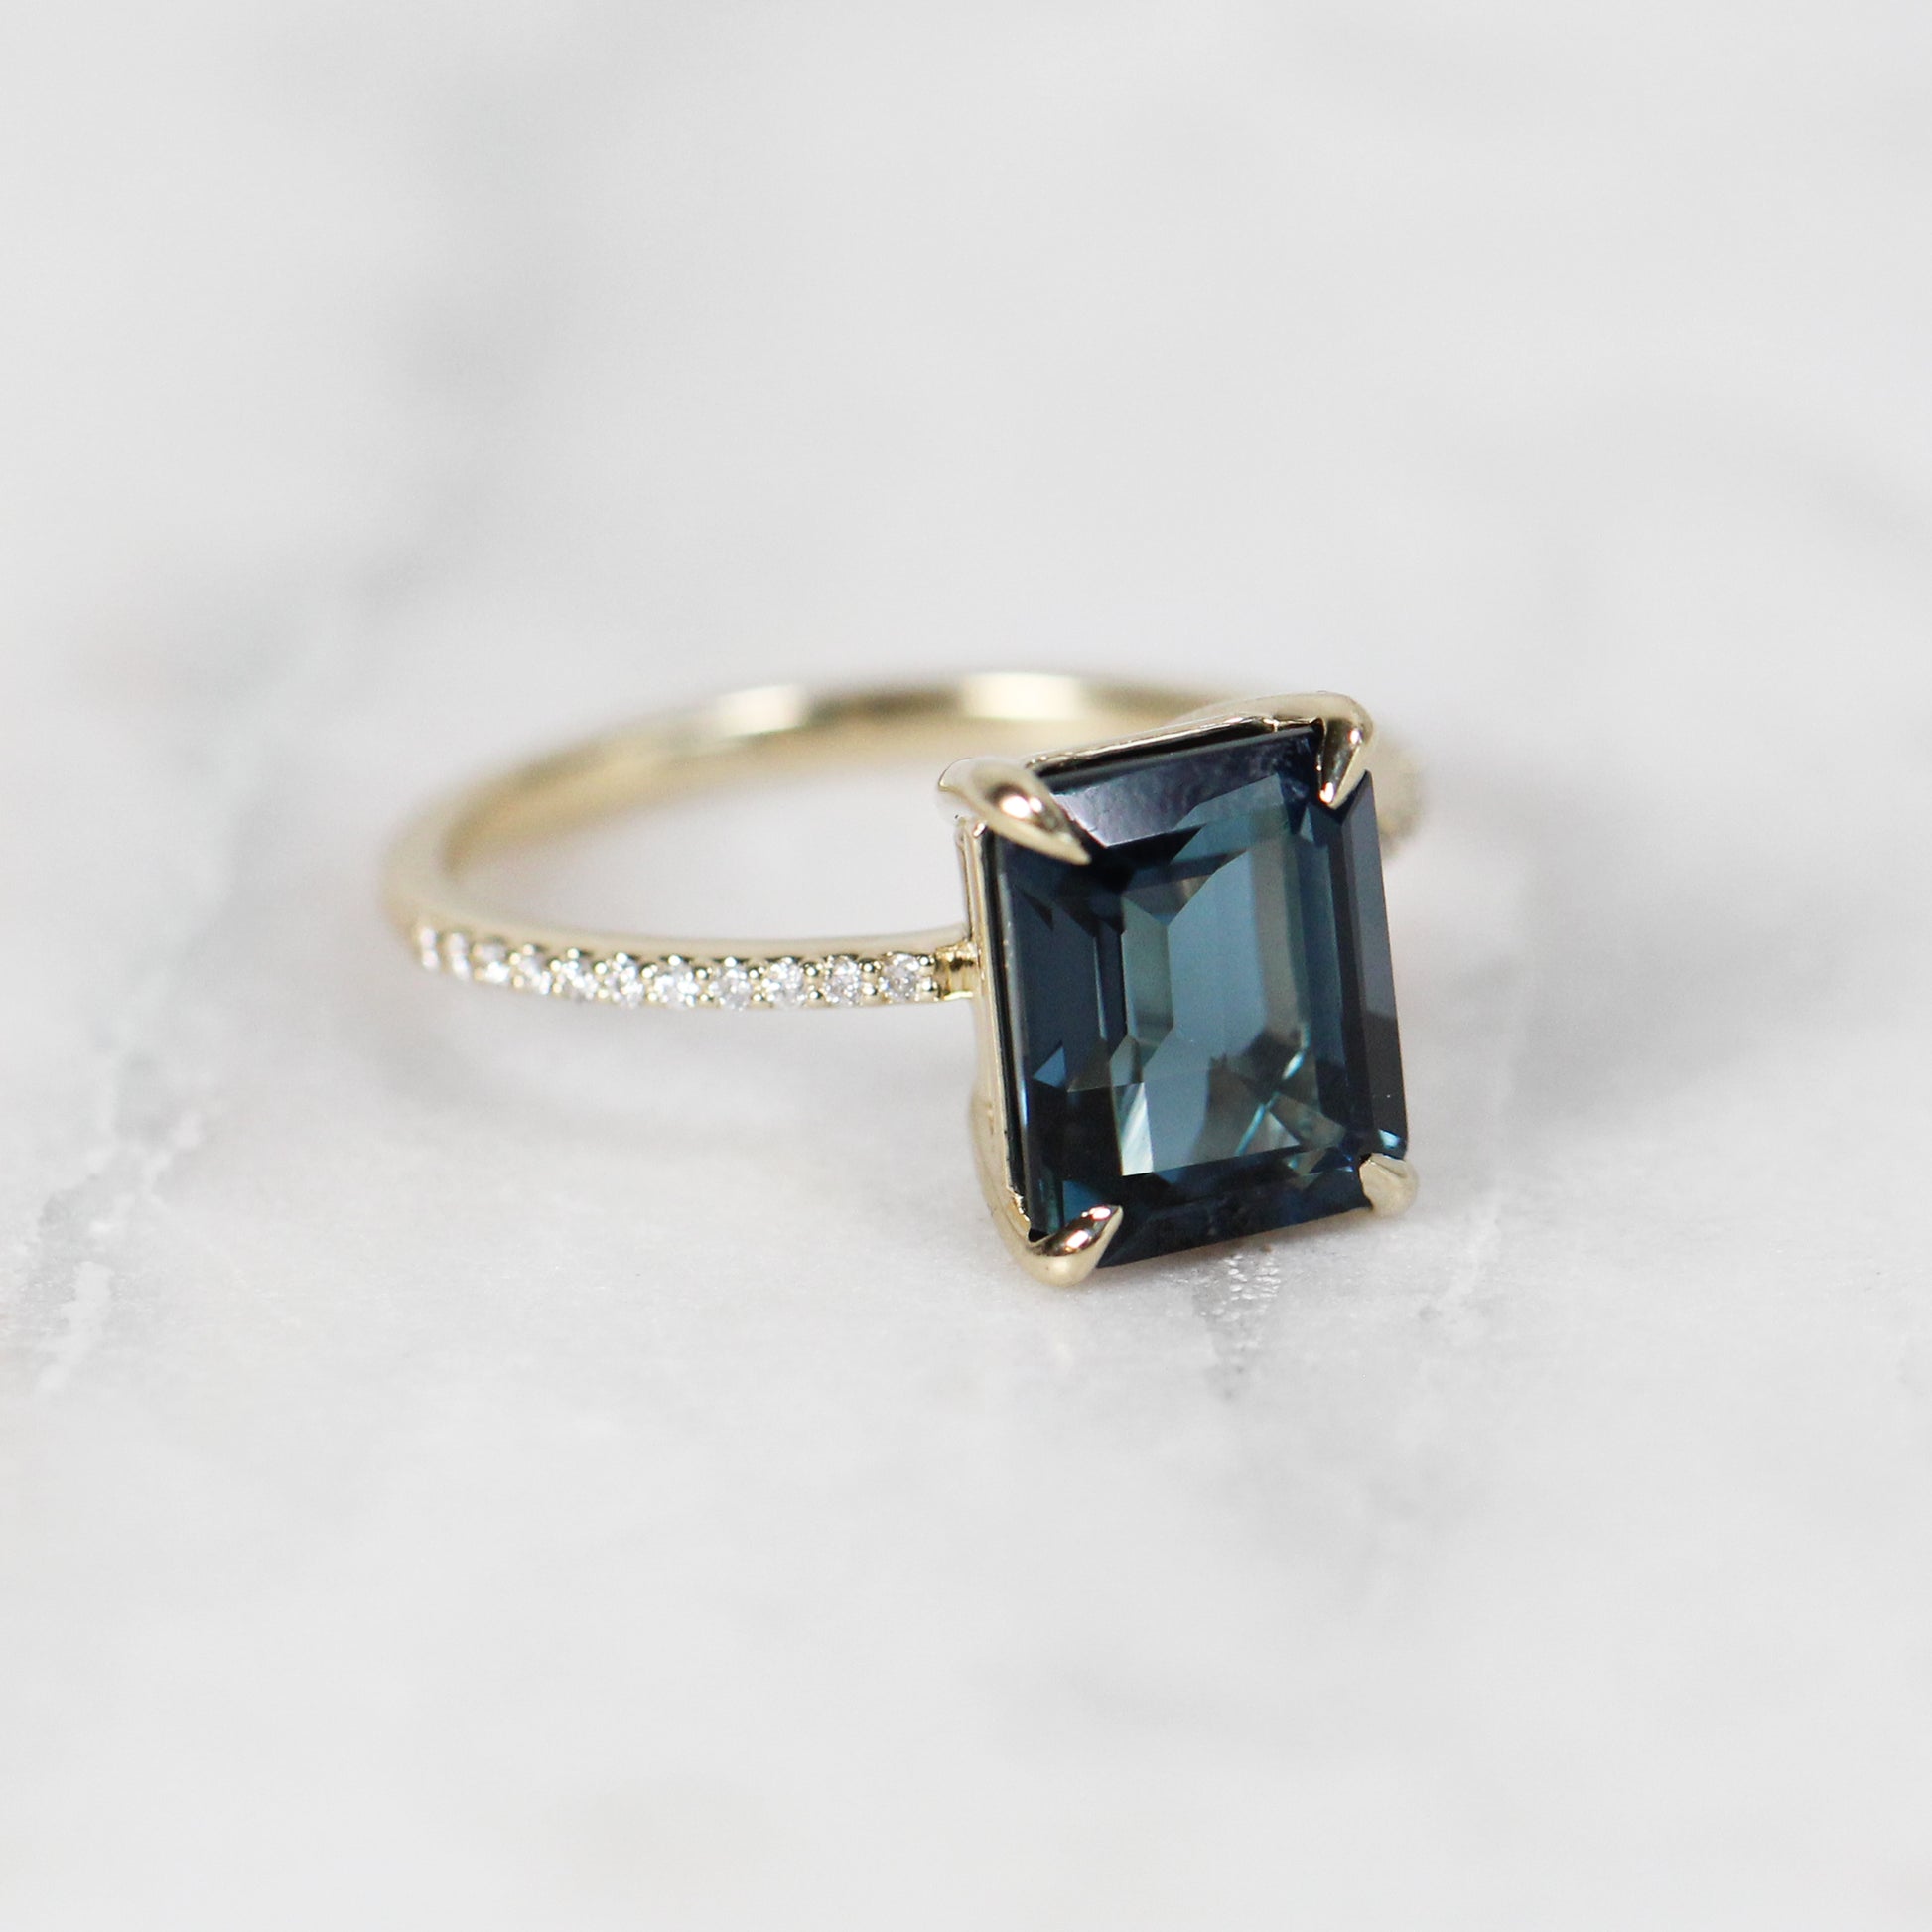 Mia Ring with 3.75ct London Blue Topaz Emerald Cut - Custom Made to Order - Midwinter Co. Alternative Bridal Rings and Modern Fine Jewelry